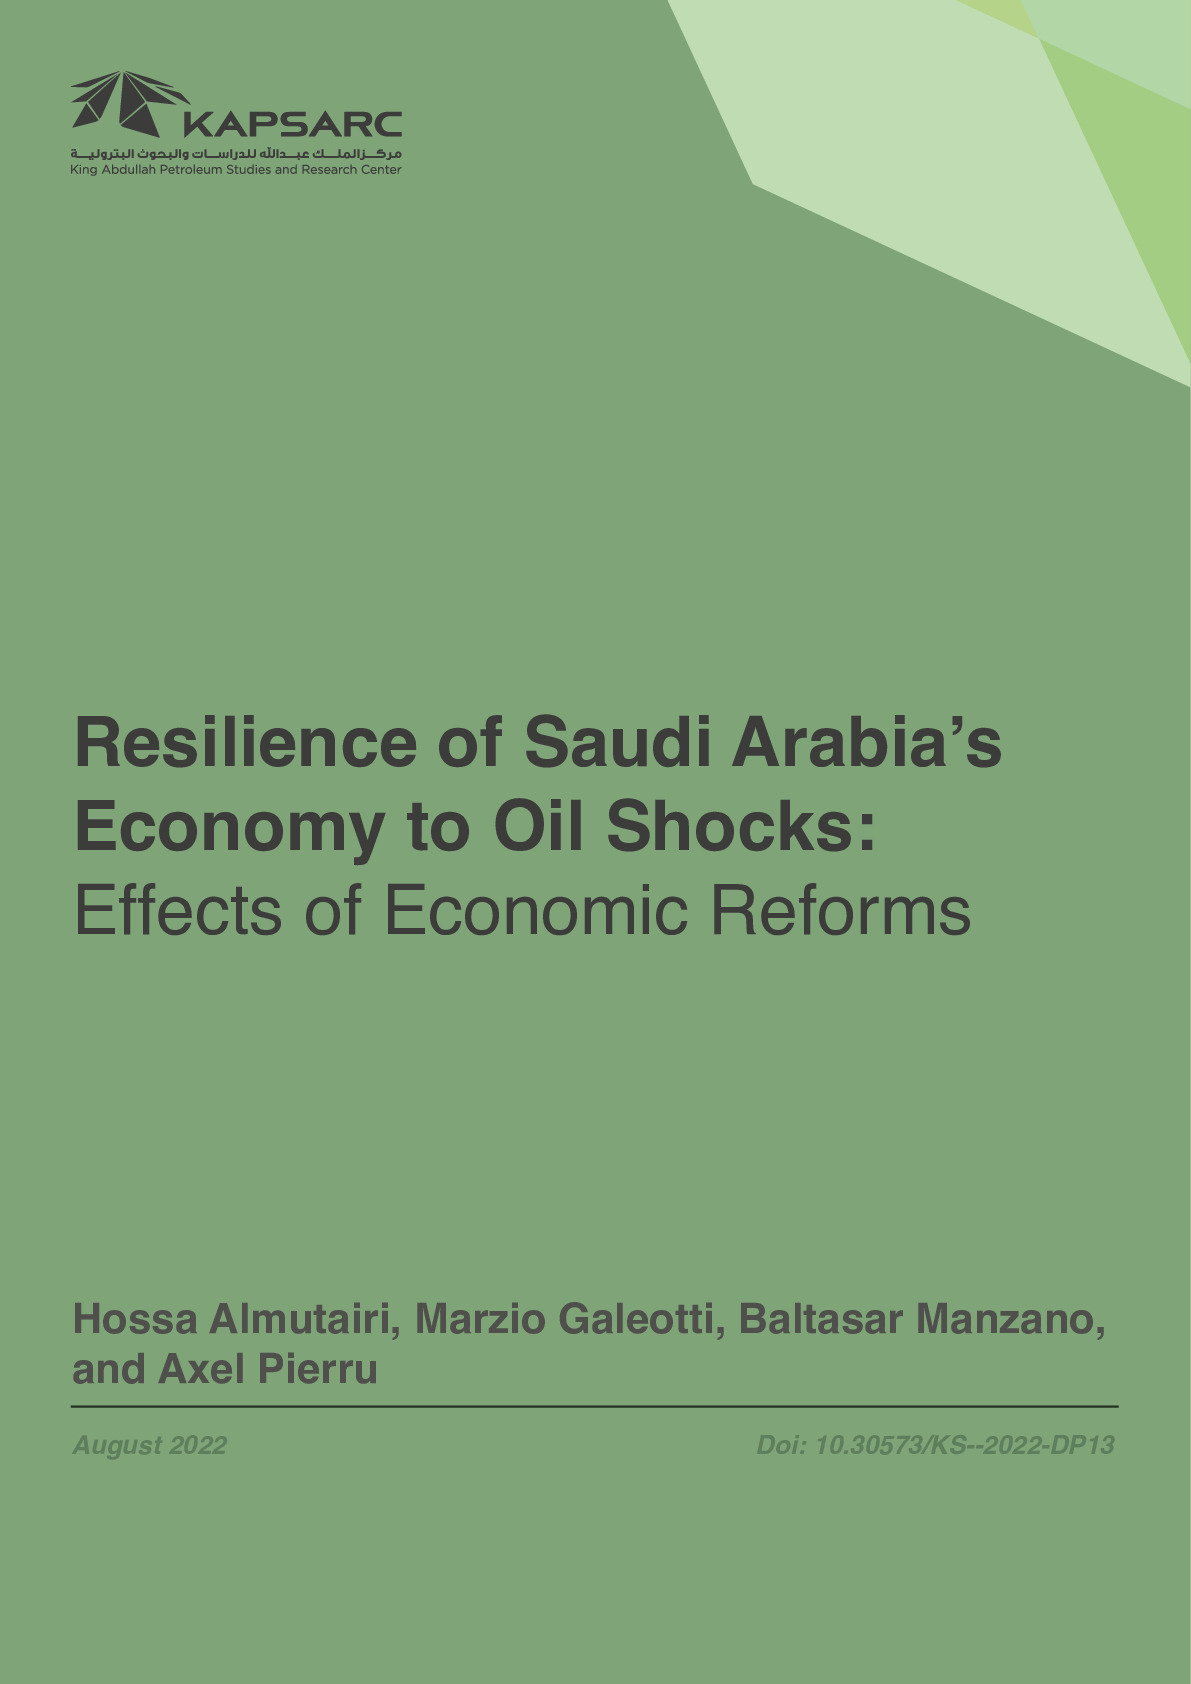 Resilience of Saudi Arabia’s Economy to Oil Shocks: Effects of Economic Reforms